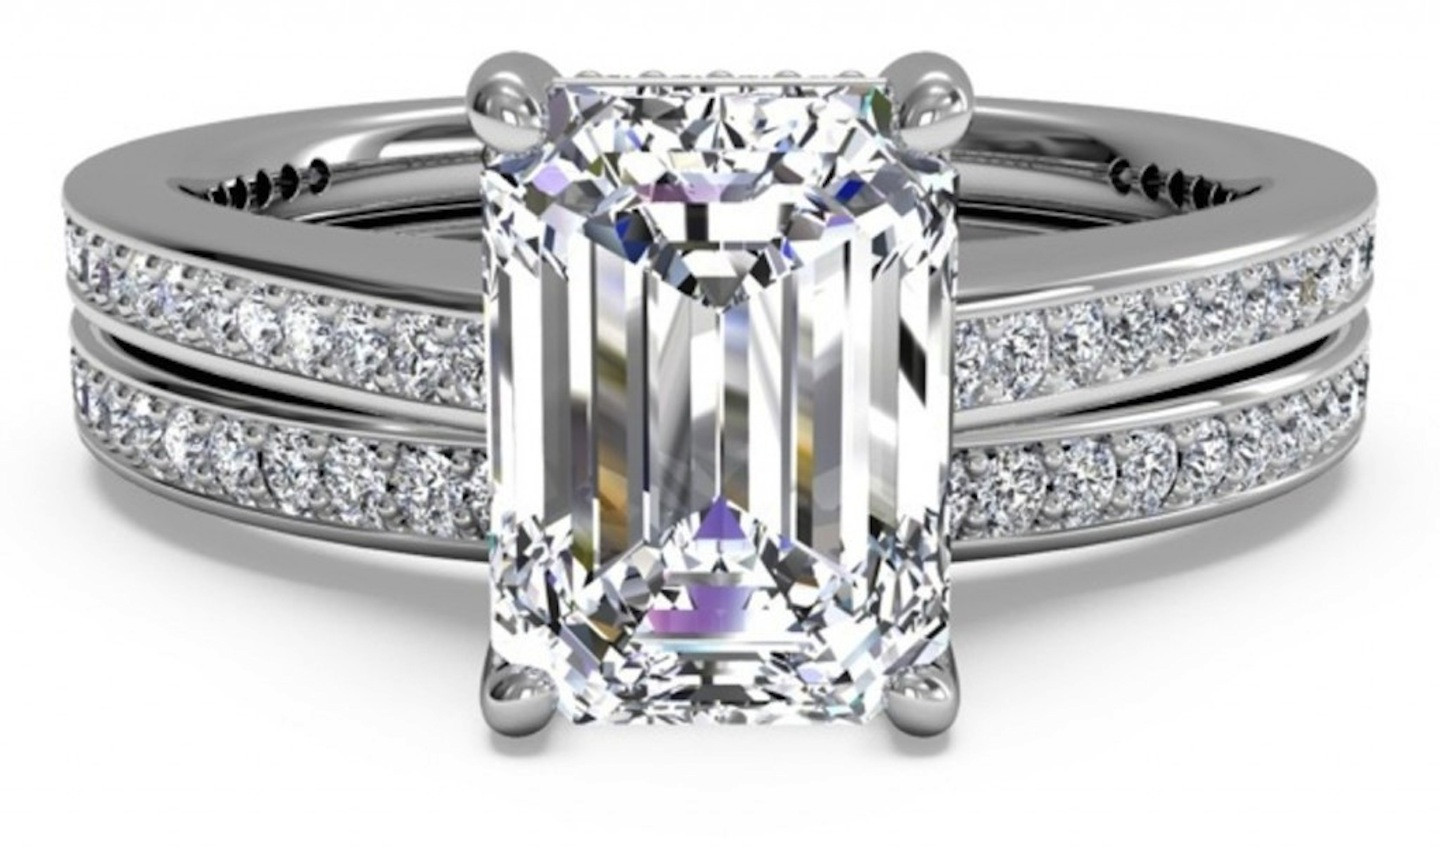 Emerald Cut Wedding Rings
 3 wedding bands to wear with your emerald cut engagement